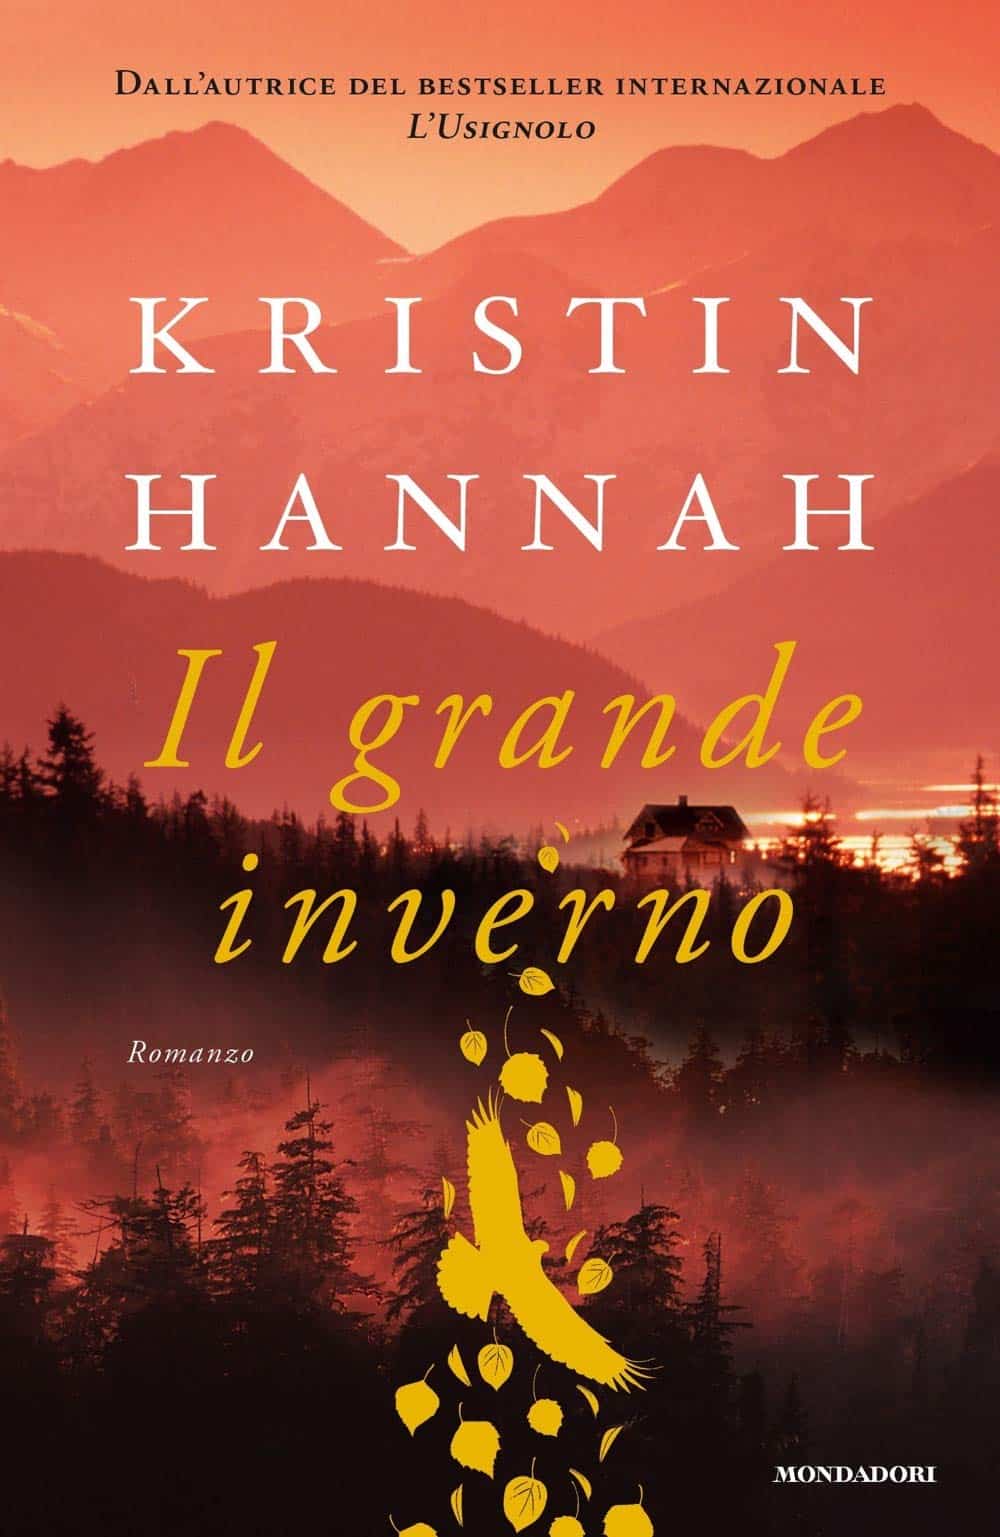 The Great Alone Italian Cover published by Mondadori